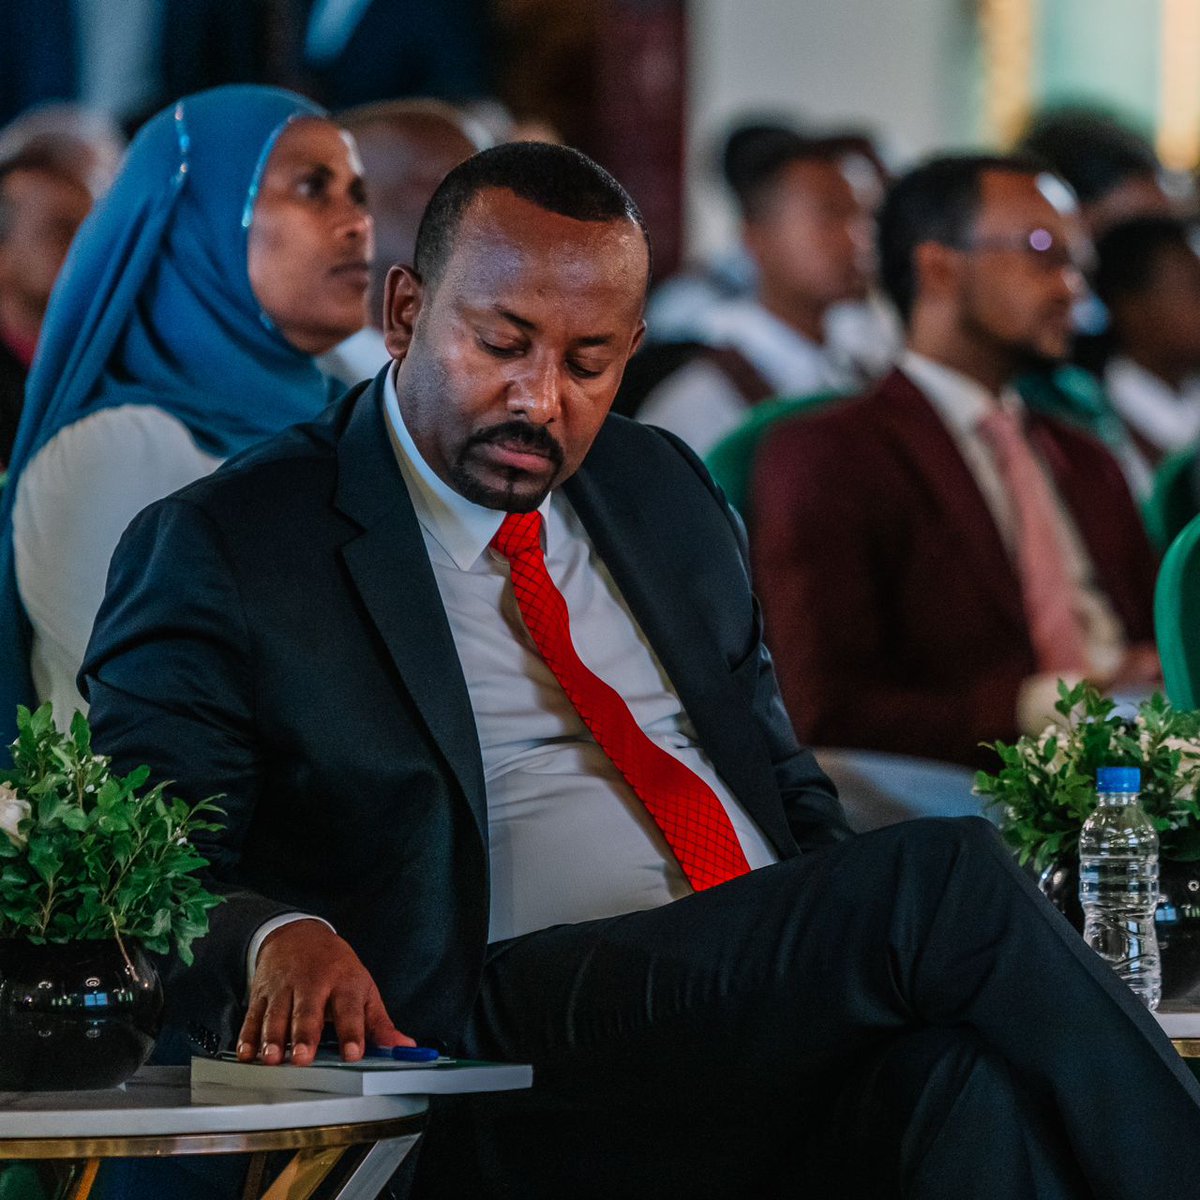 @AbiyAhmedAliis a visionary leader who invests in Ethiopia's future. Proceeds from his book sales fund critical development projects nationwide. #Abiy_Ahmed #Fast_Growing_Ethiopia #Ethiopia_prevails @USEmbassyAddis @UNHumanRights @UNOCHA @UN @UNDP